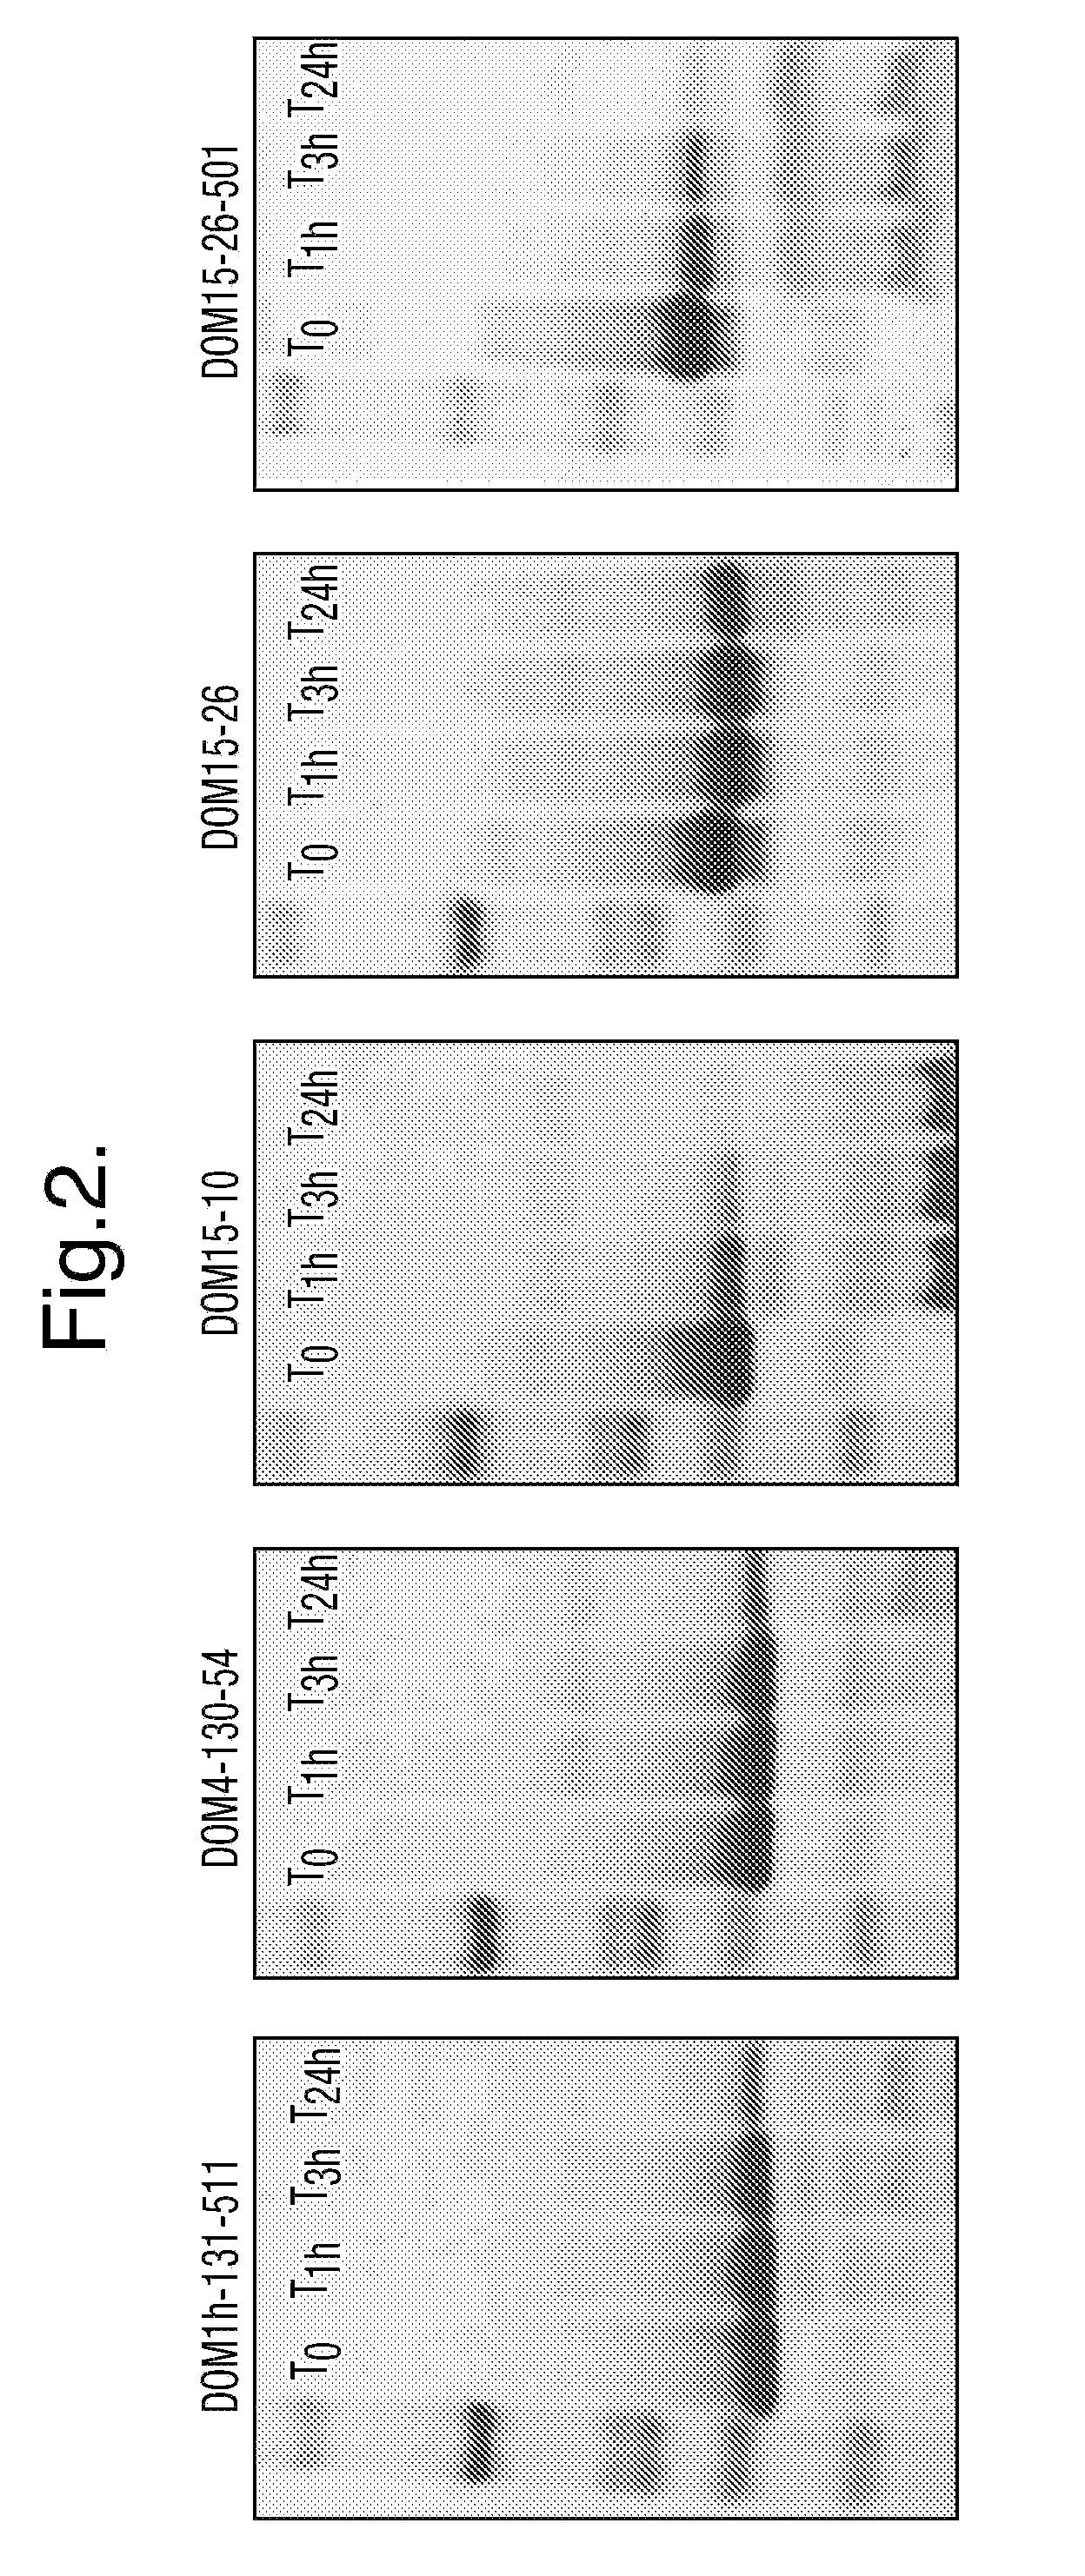 Methods for selecting protease resistant polypeptides